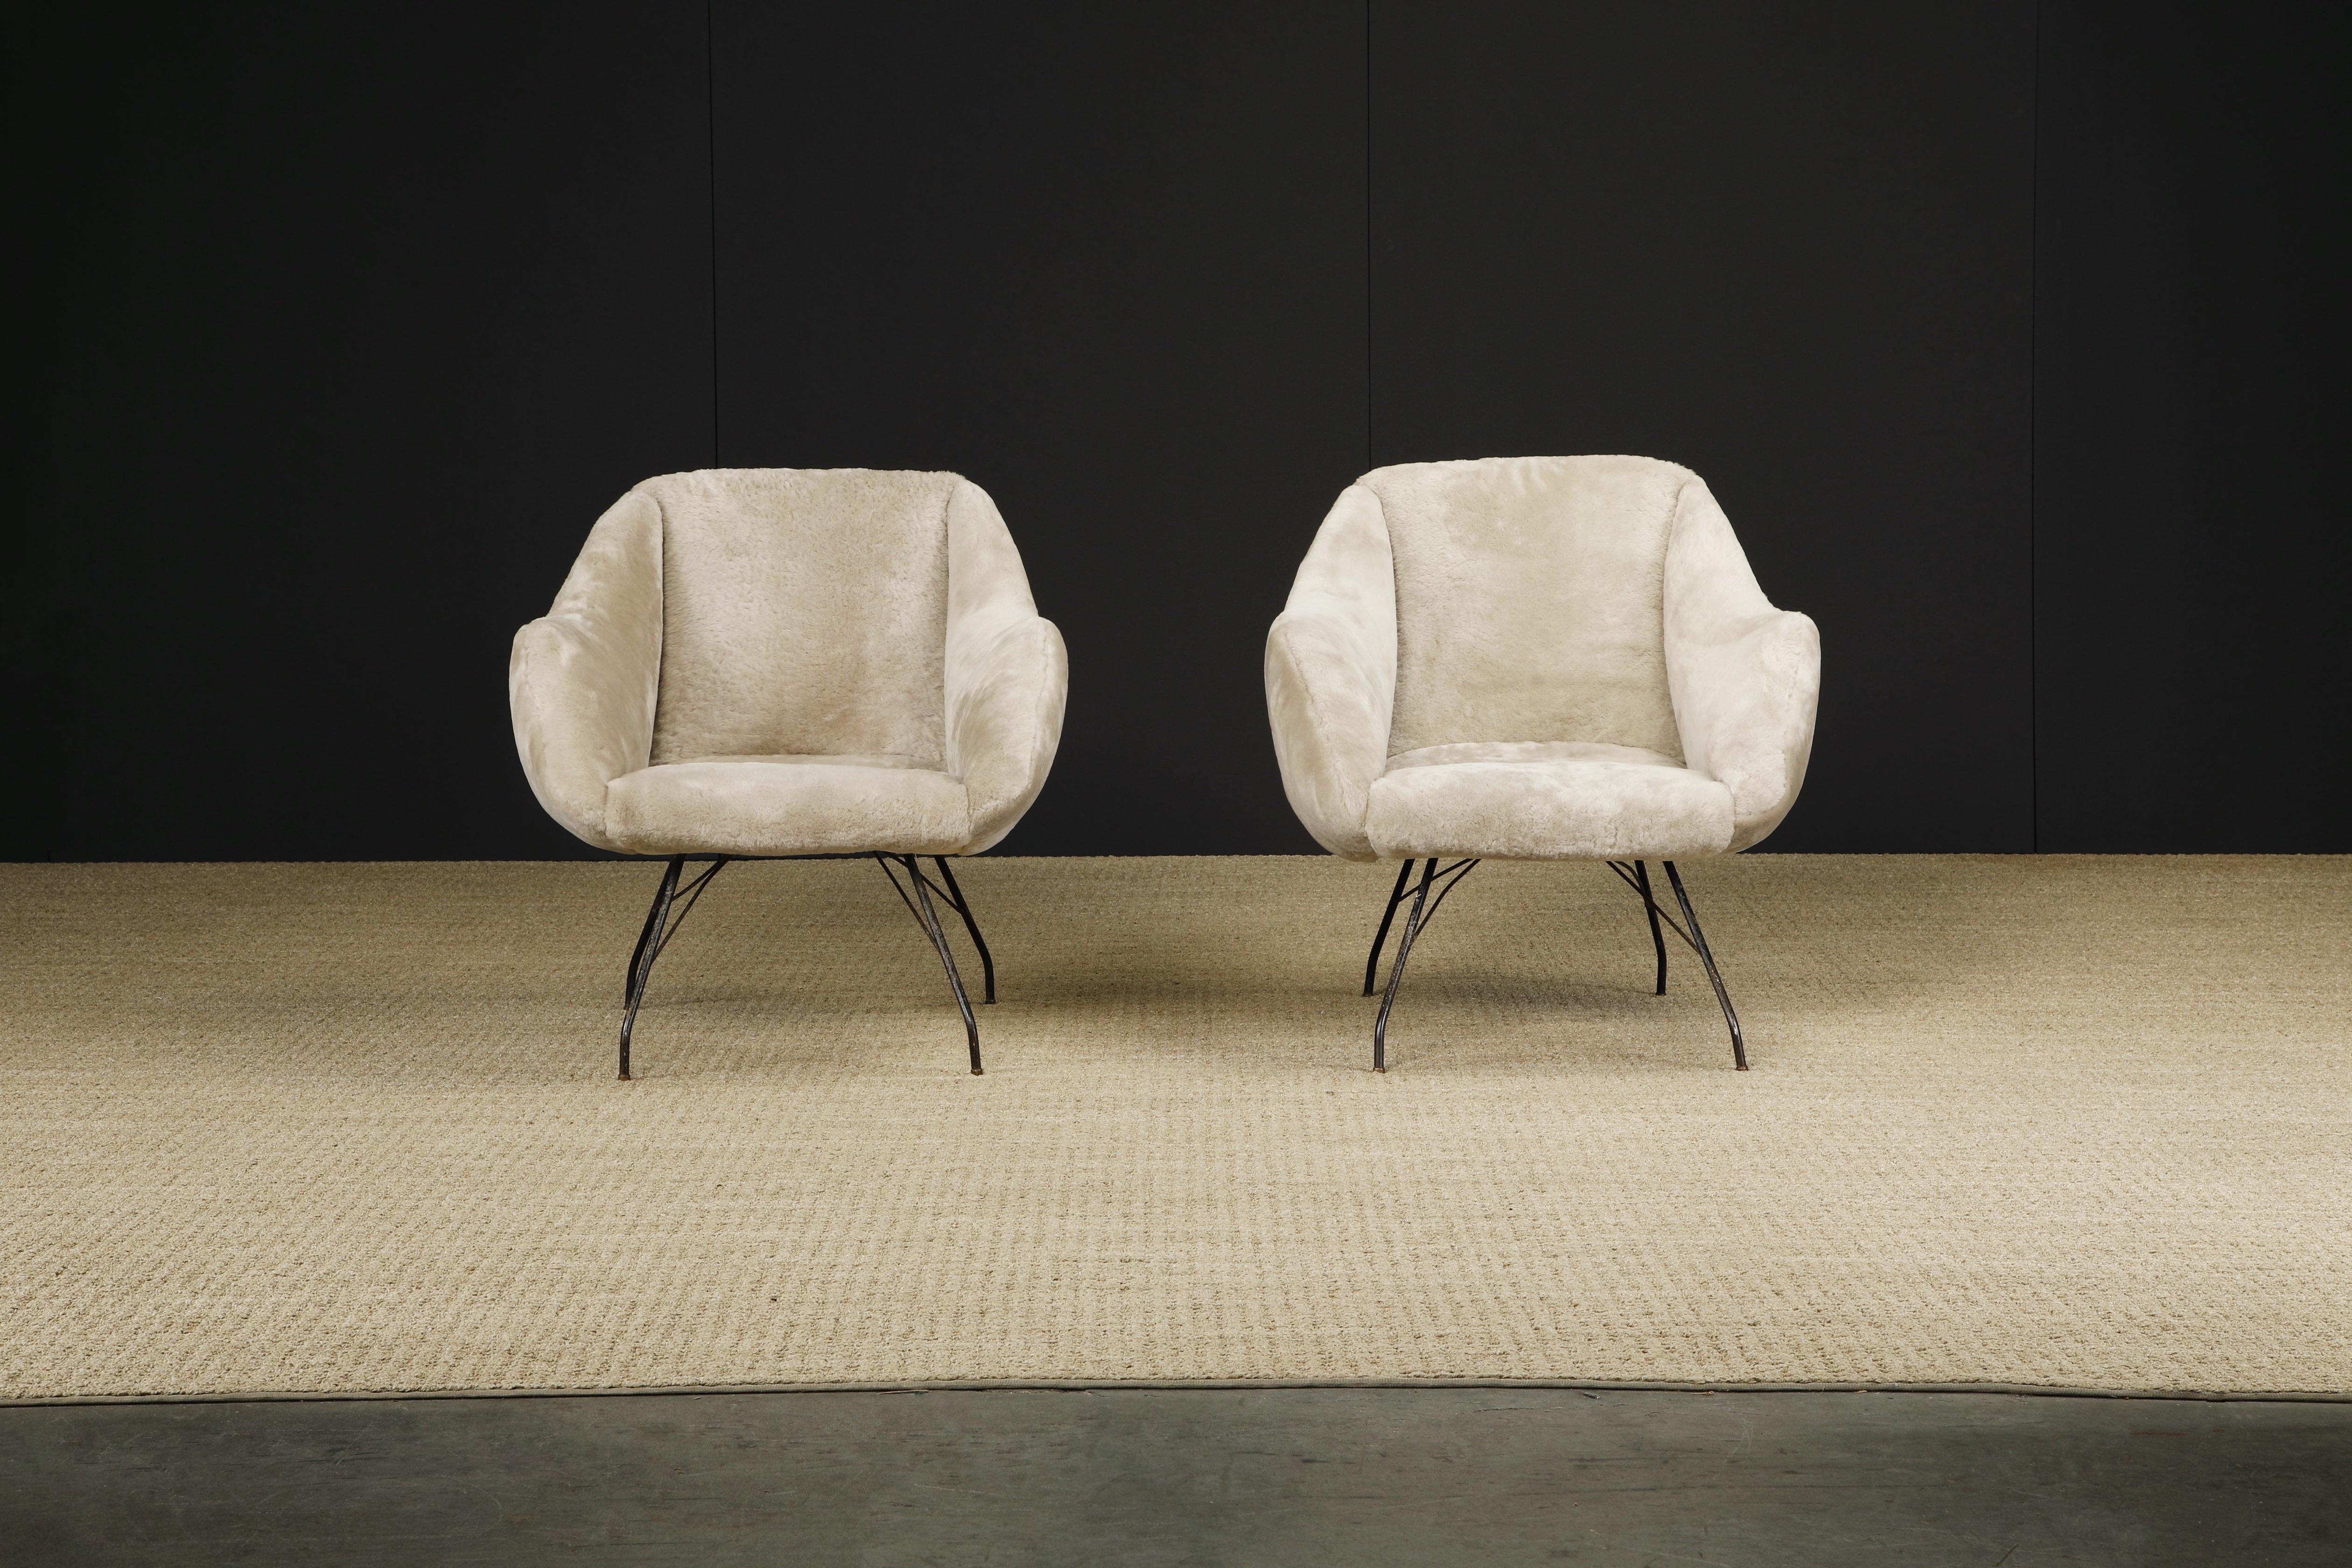 Beautifully reupholstered with soft furry taupe colored sheepskin, this pair of 'Concha' chairs by Martin Eisler and Carlo Hauner for Forma, Brazil, encapsulates the quality and innovation of their designs. This elegant scoop chair with its slightly